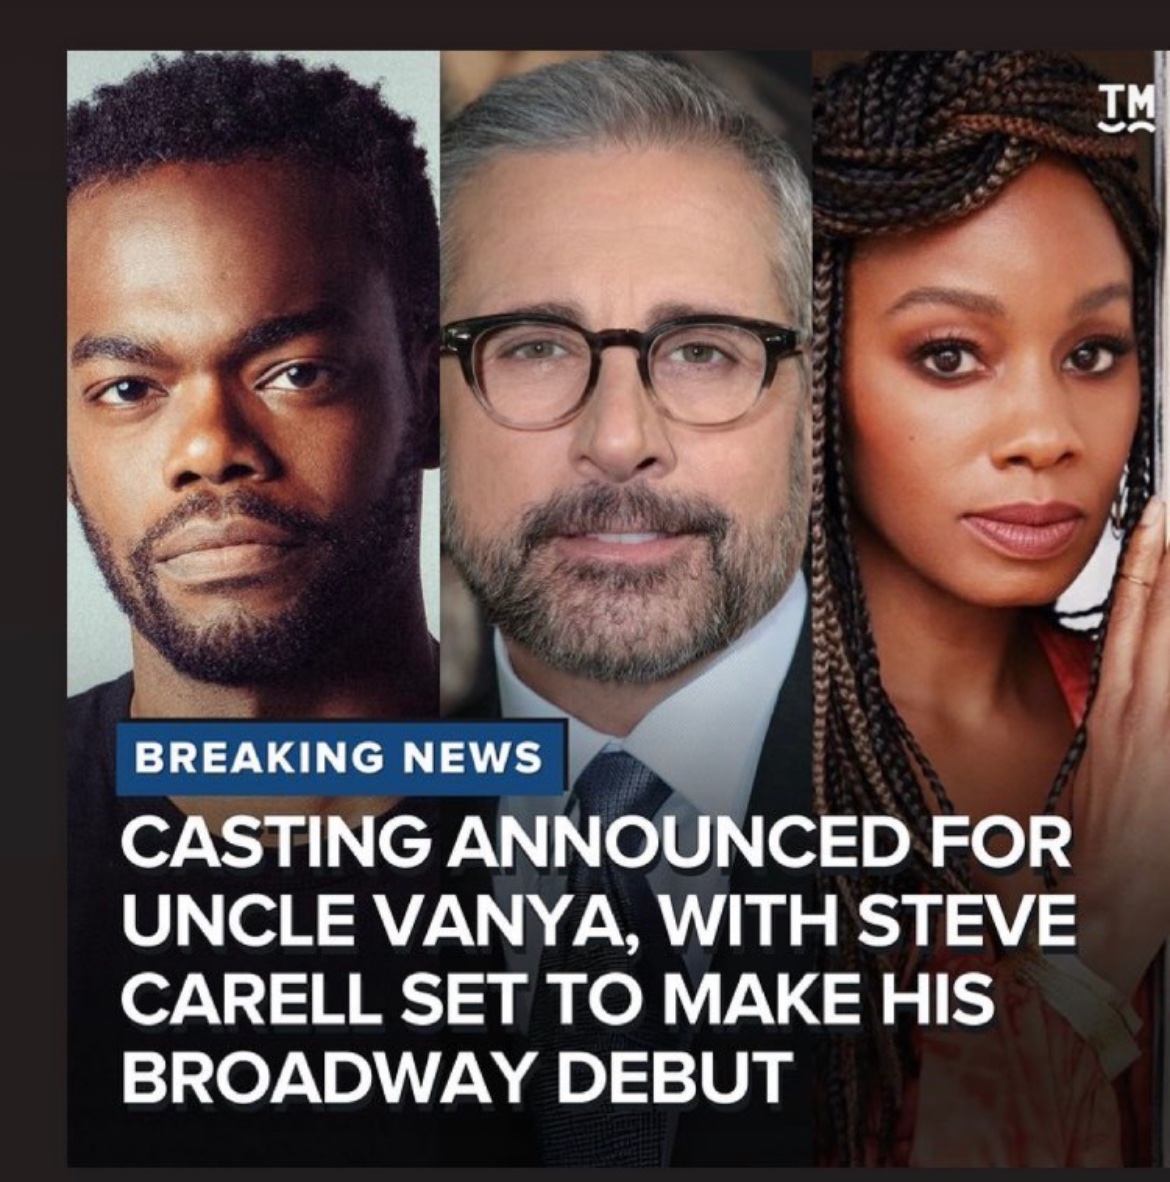 See you soon. #UncleVanya #Broadway